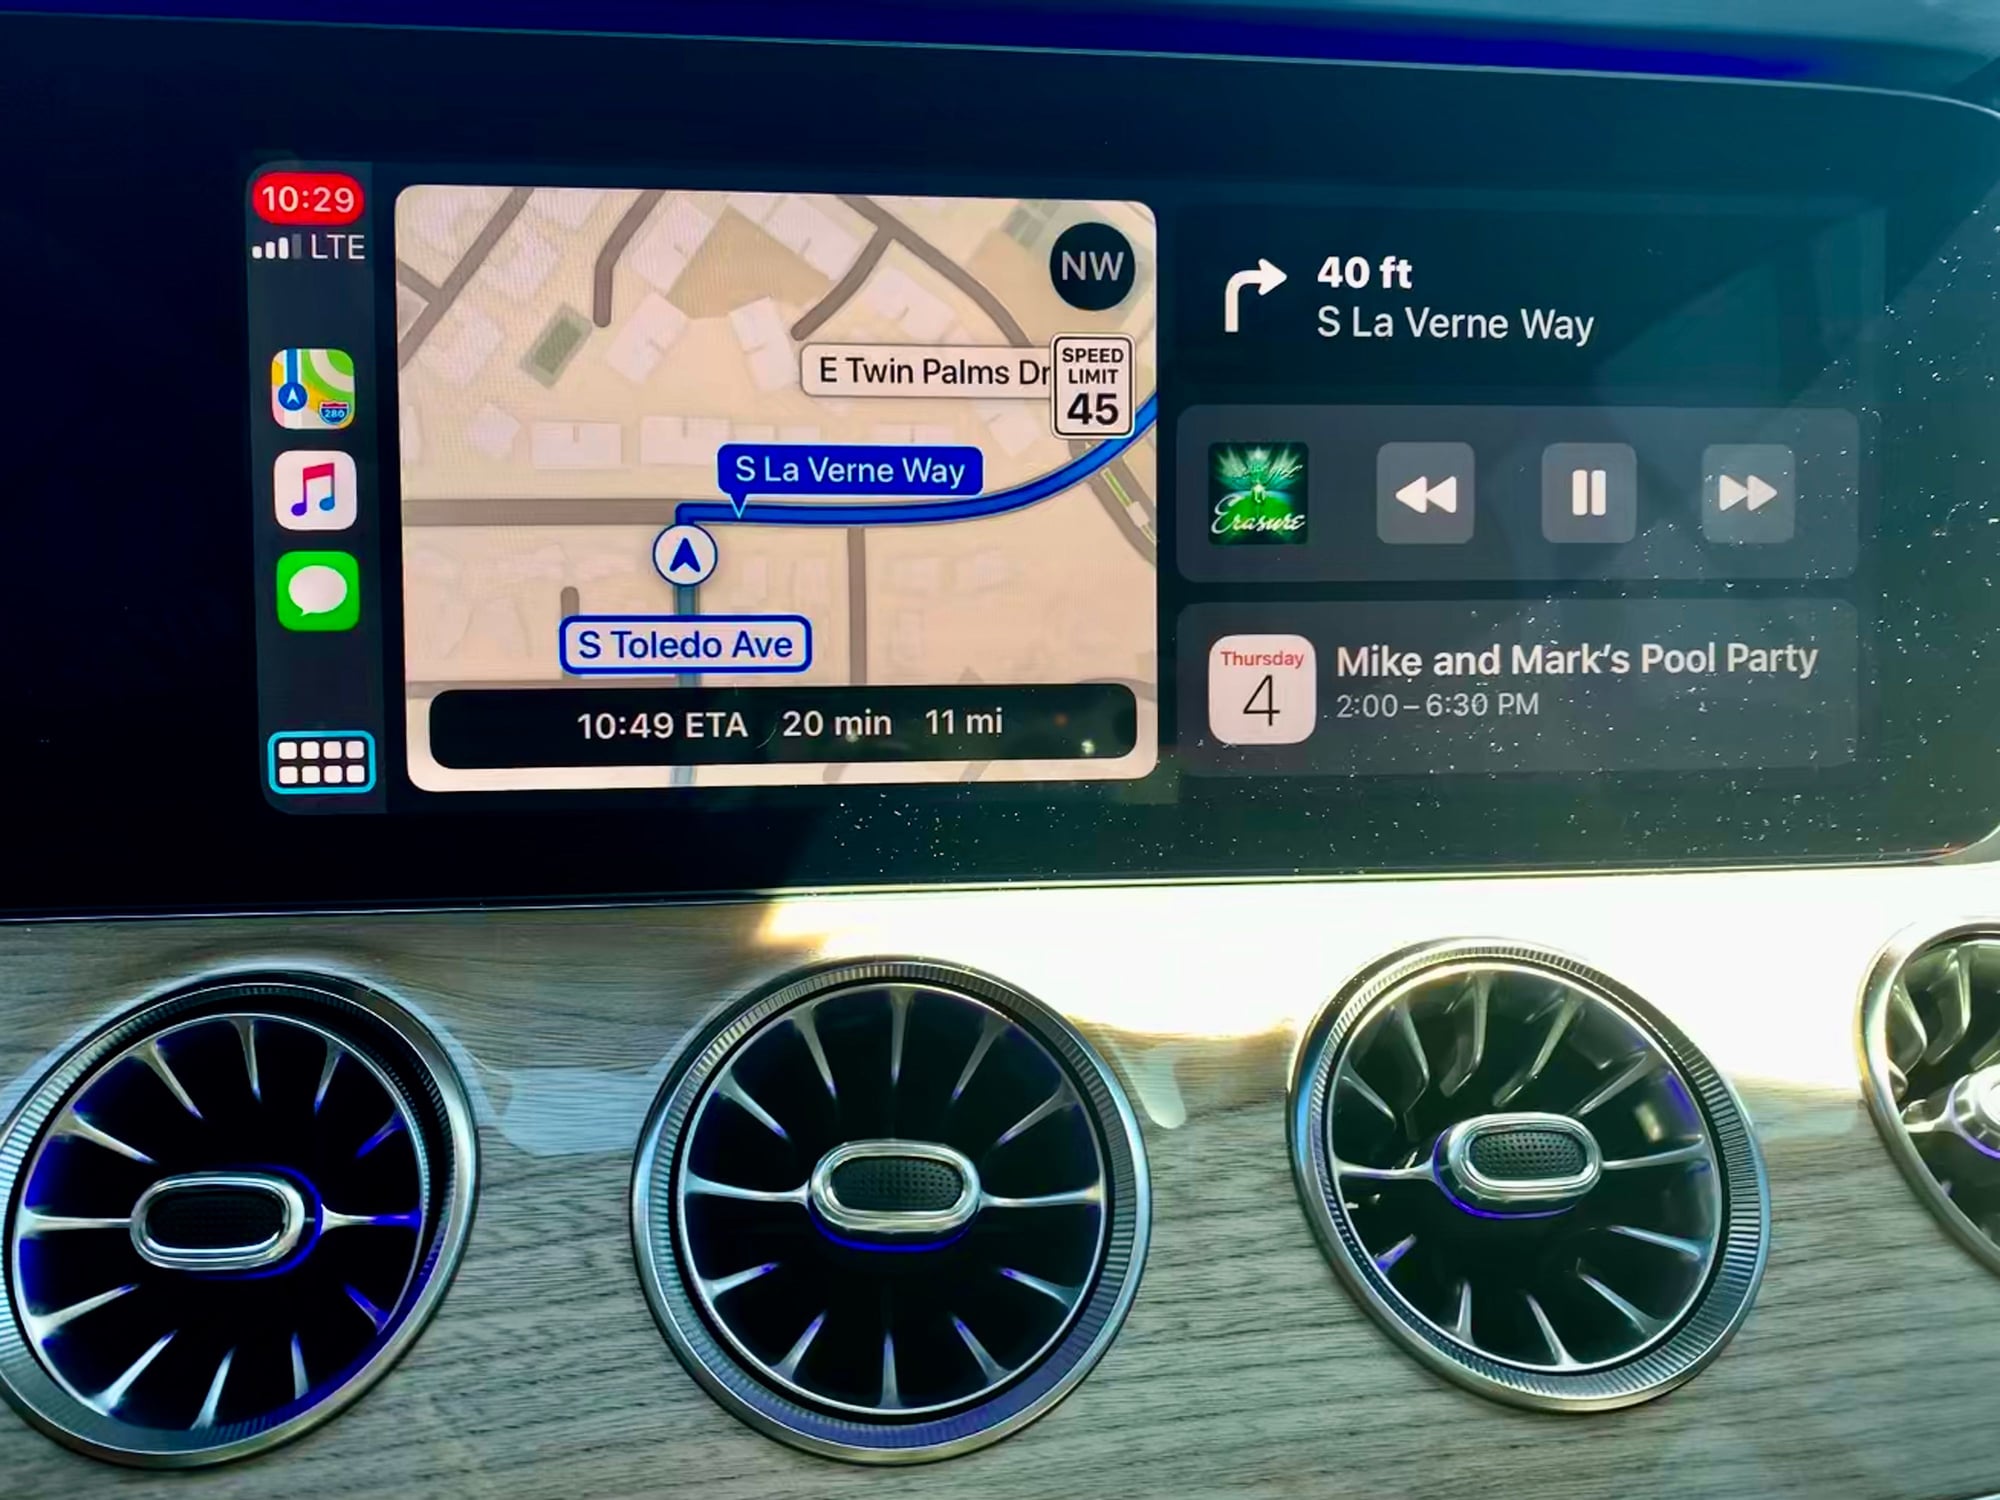 Will the new CarPlay finally allow fullscreen on Mercedes MBUX? Since that  photo clearly is from a Mercedes. : r/mercedes_benz